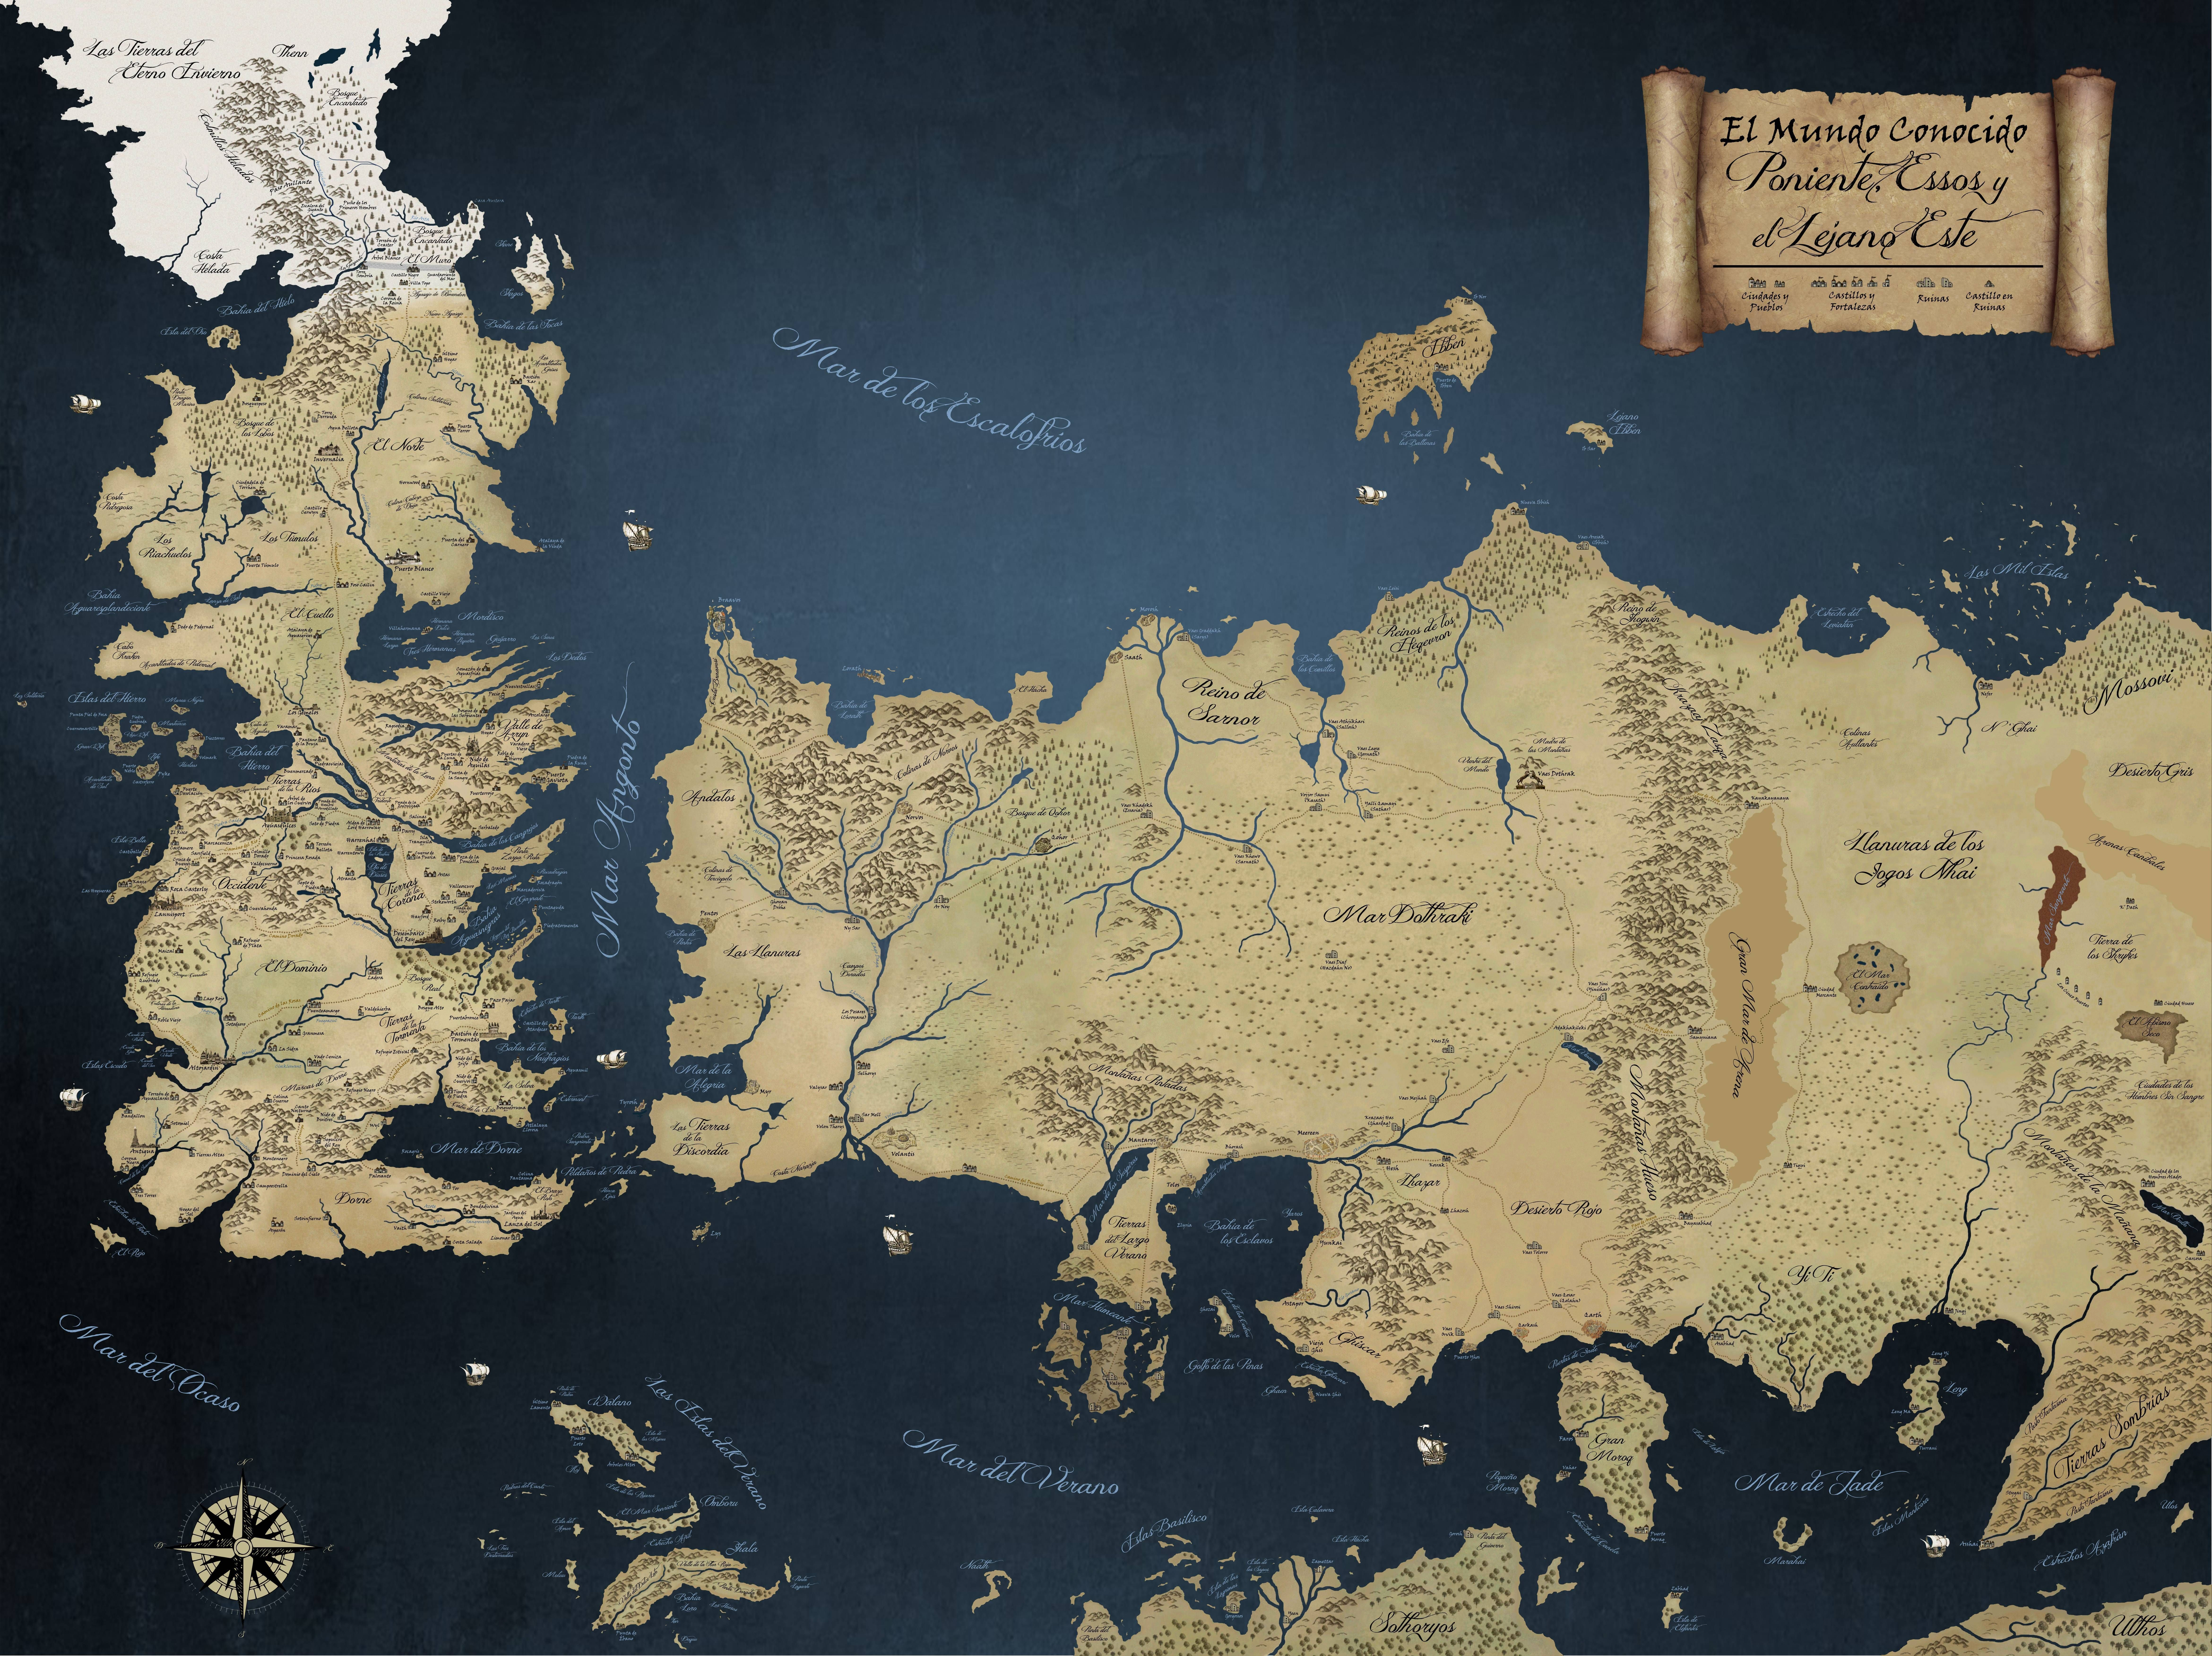 Game of Thrones wallpaper, Game of Thrones HD wallpaper | Wallpaper Flare